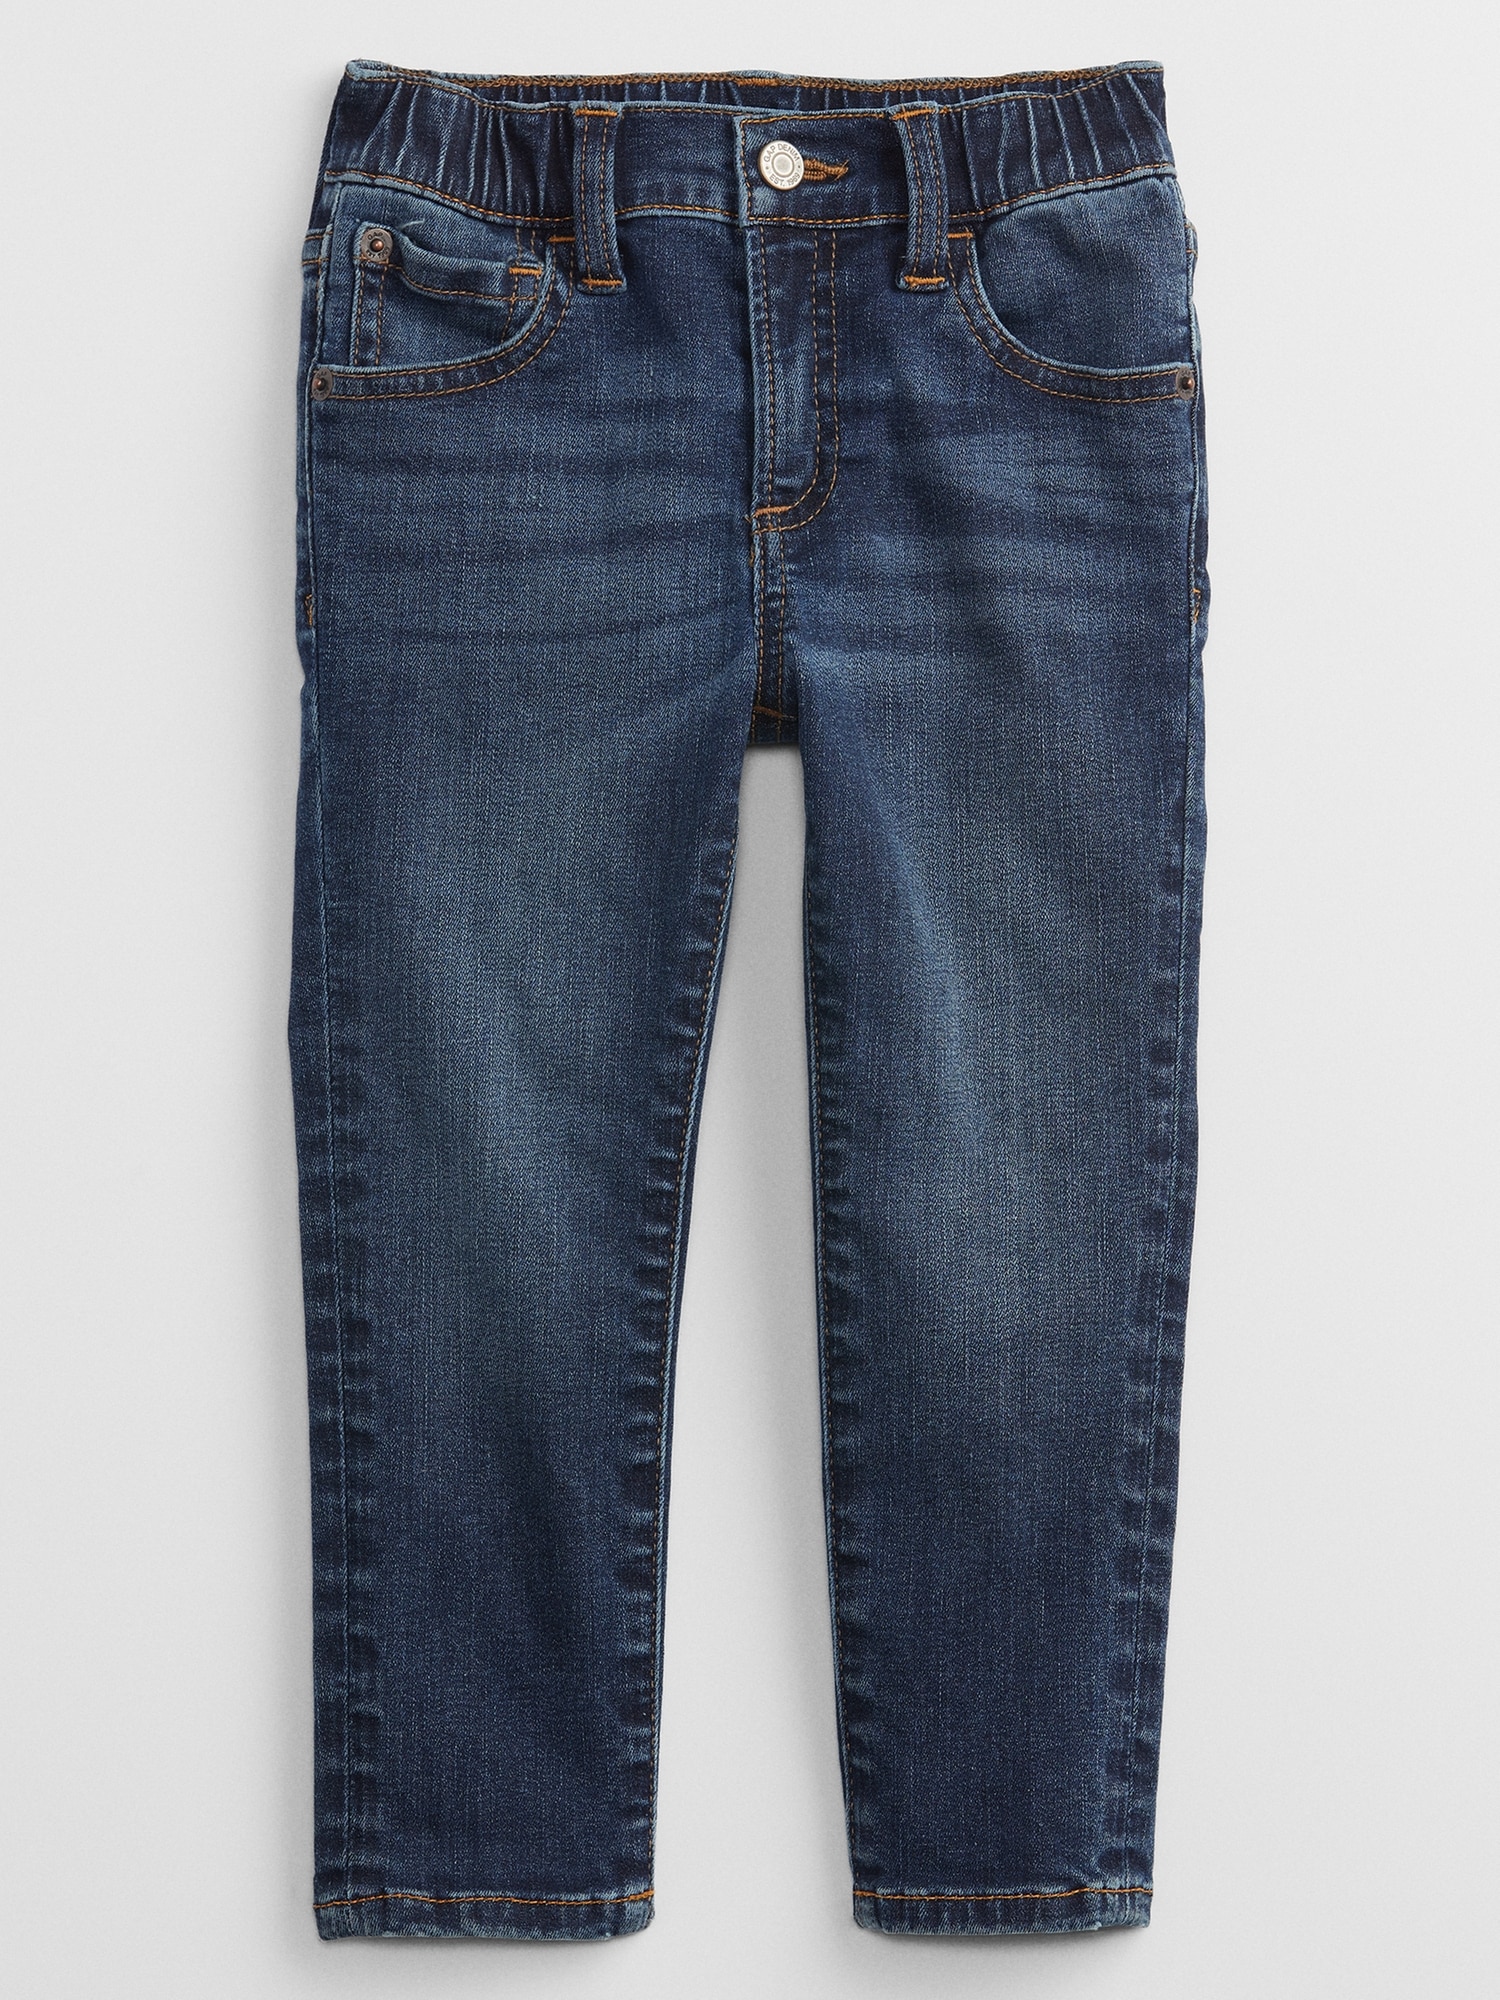 Toddler Stretch Jeans | Gap Factory